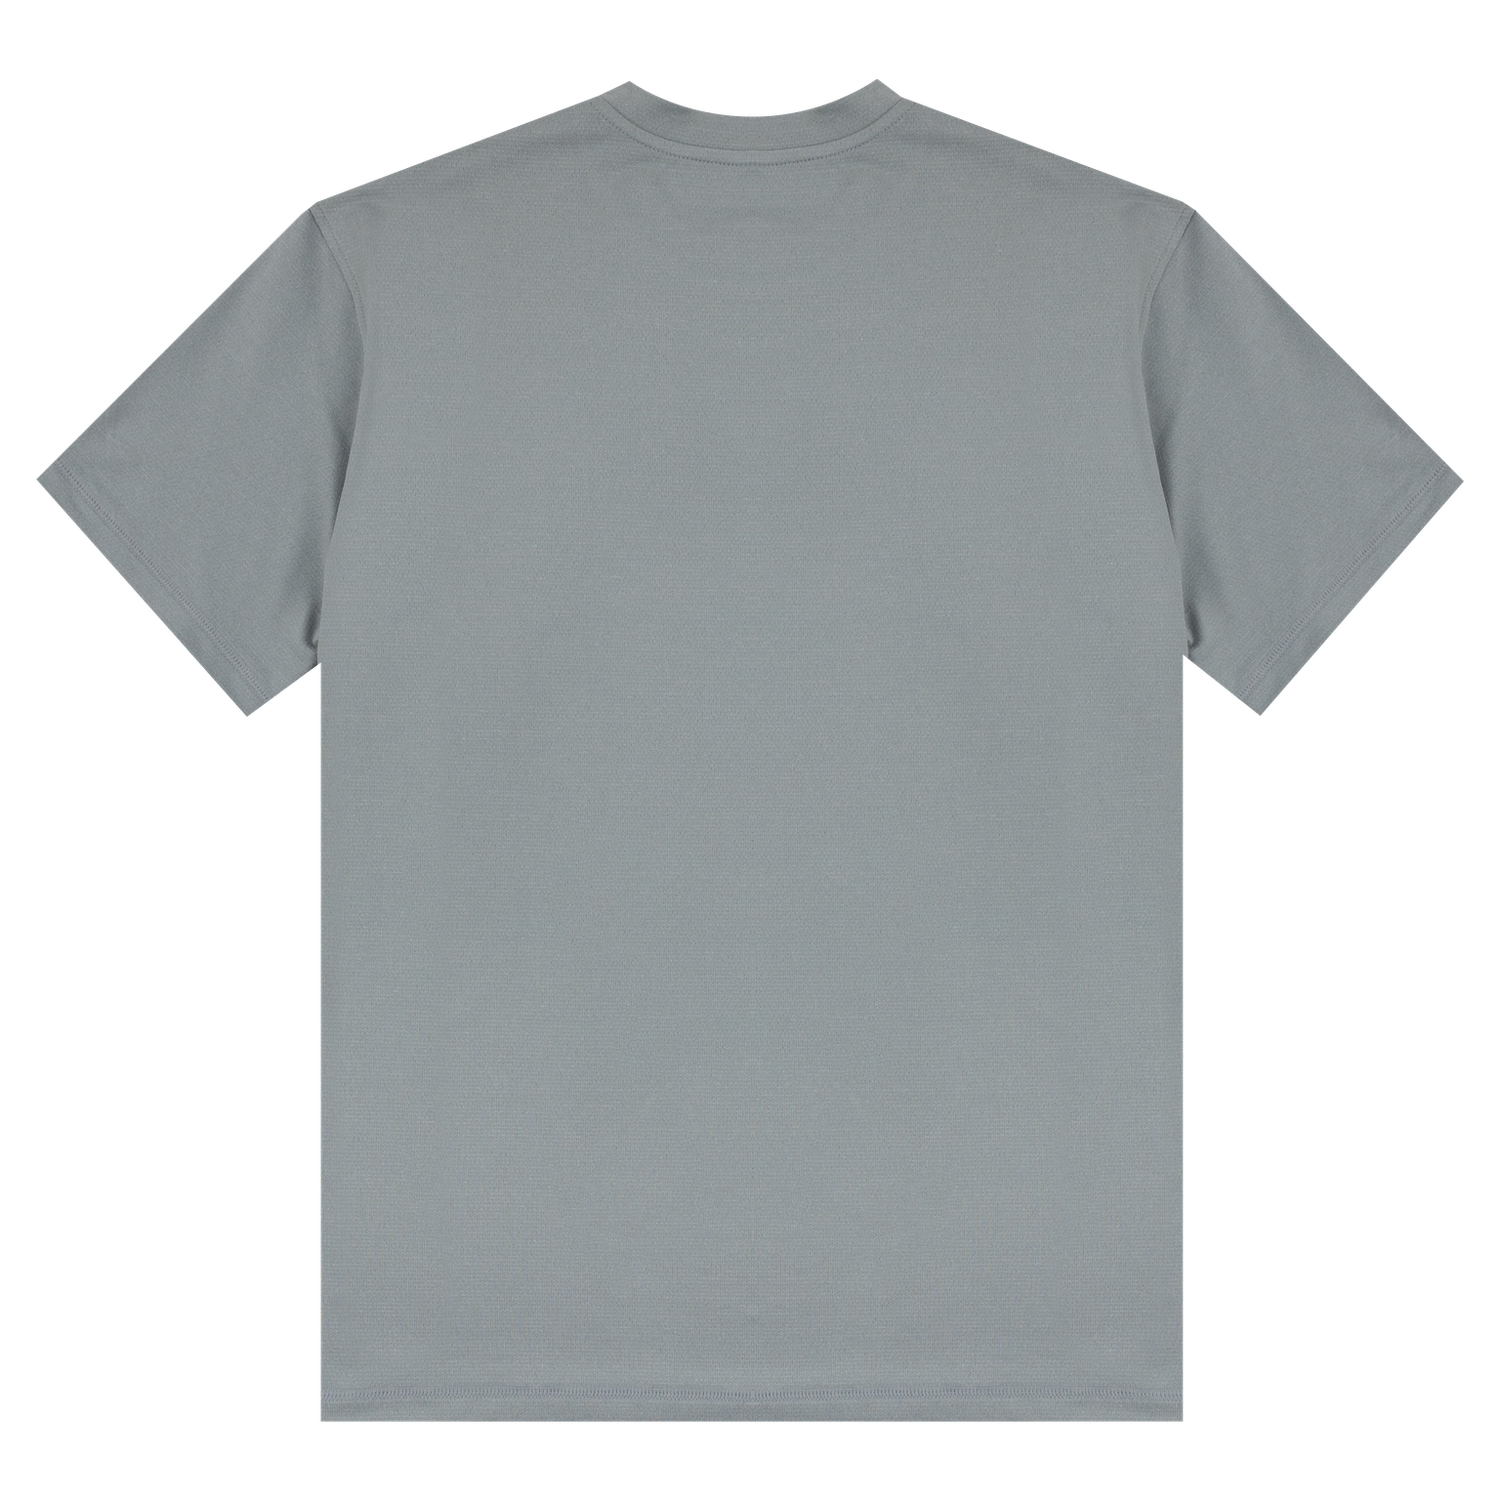 Texas Aggies Grey Outfitters Tech T-Shirt